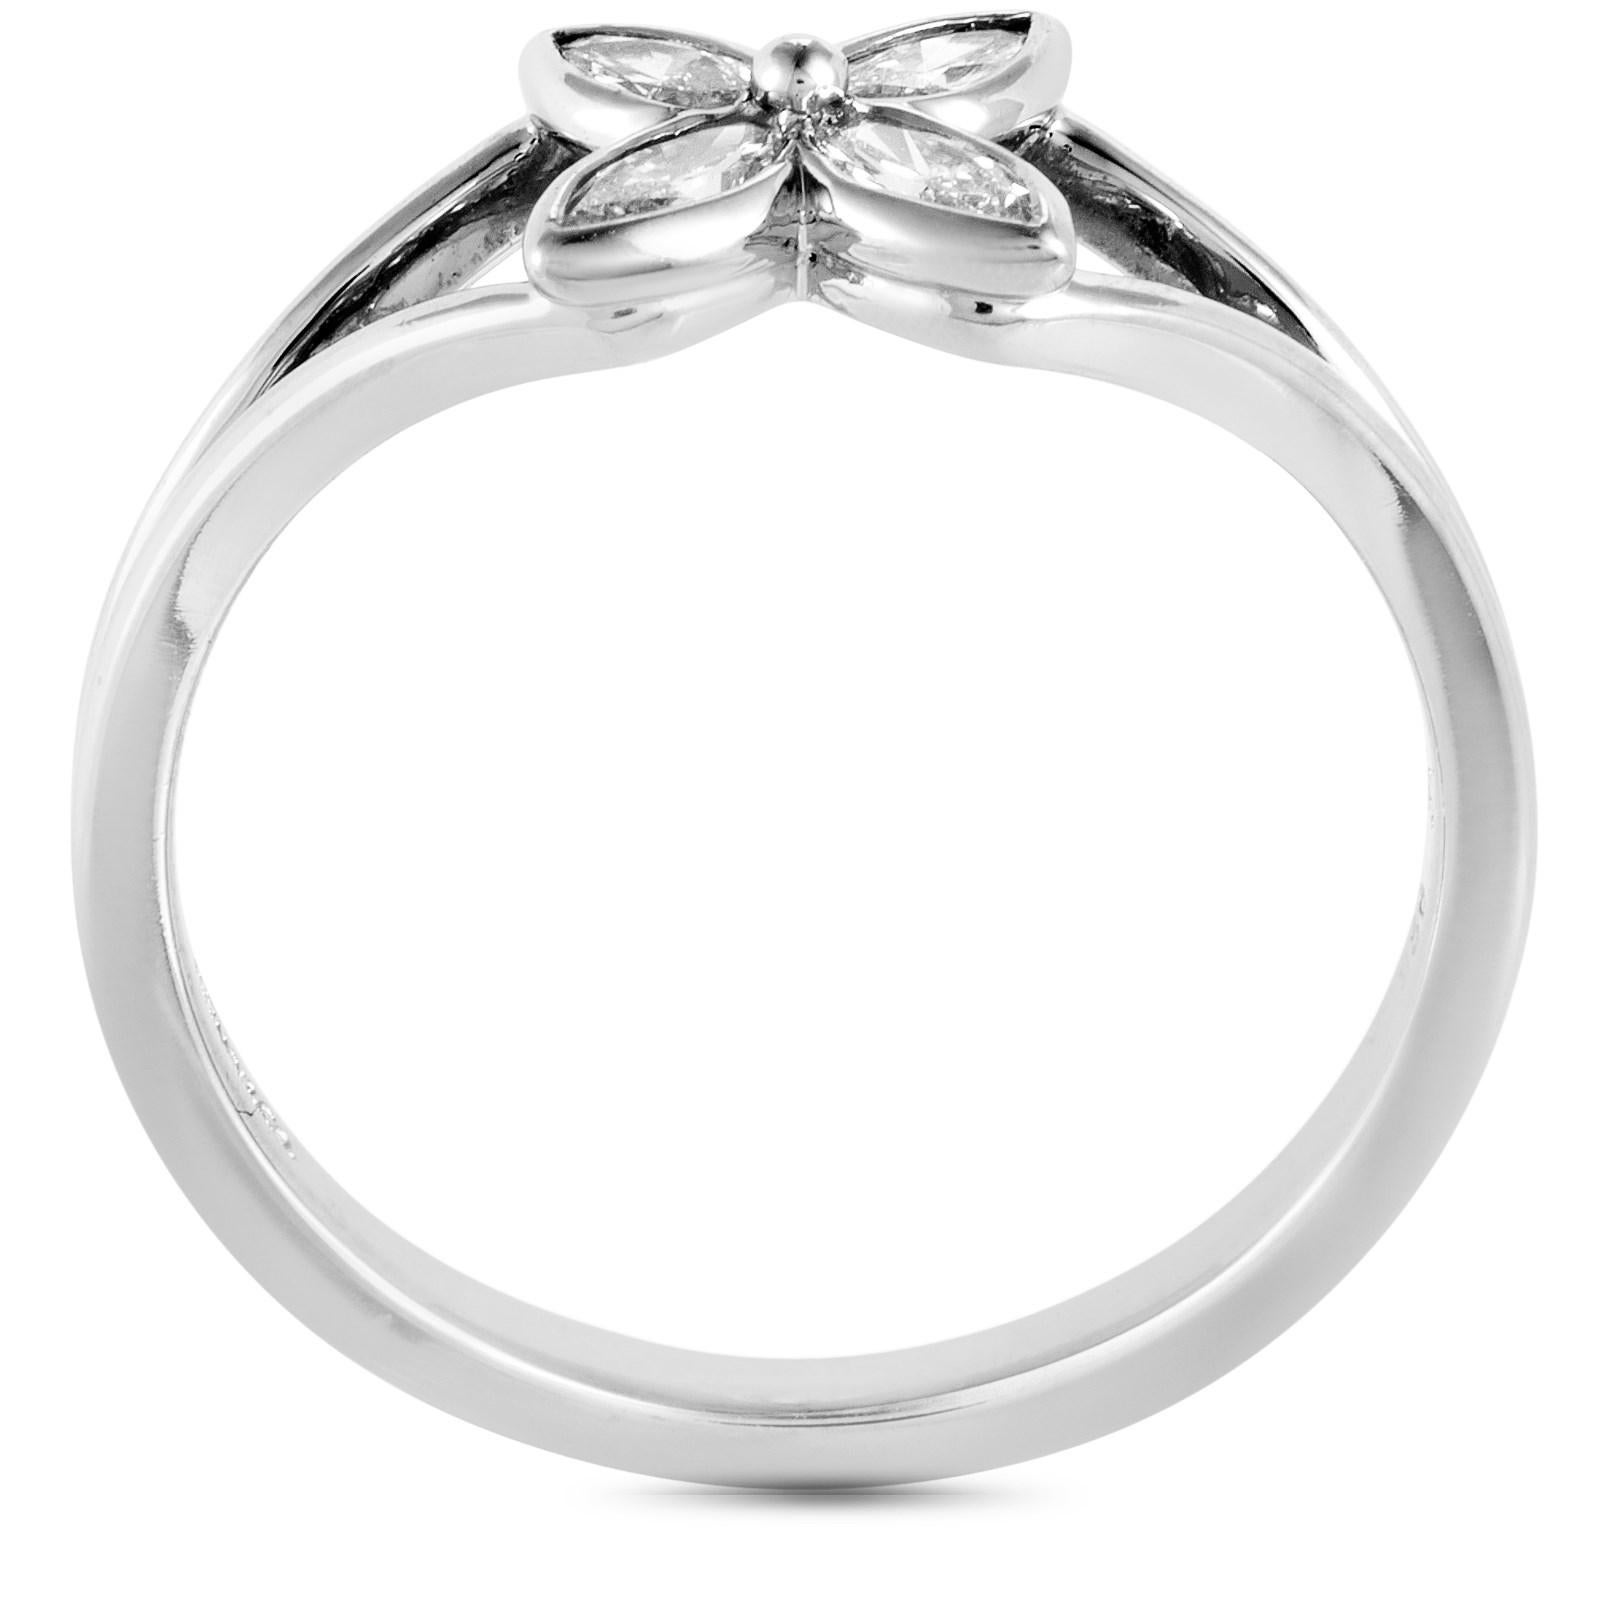 This Tiffany & Co. ring from the Victoria collection is made out of platinum and diamonds that total 0.40 carats. The ring weighs 3.3 grams and boasts band thickness of 2 mm and top height of 3 mm, while top dimensions measure 7 by 7 mm.

Offered in